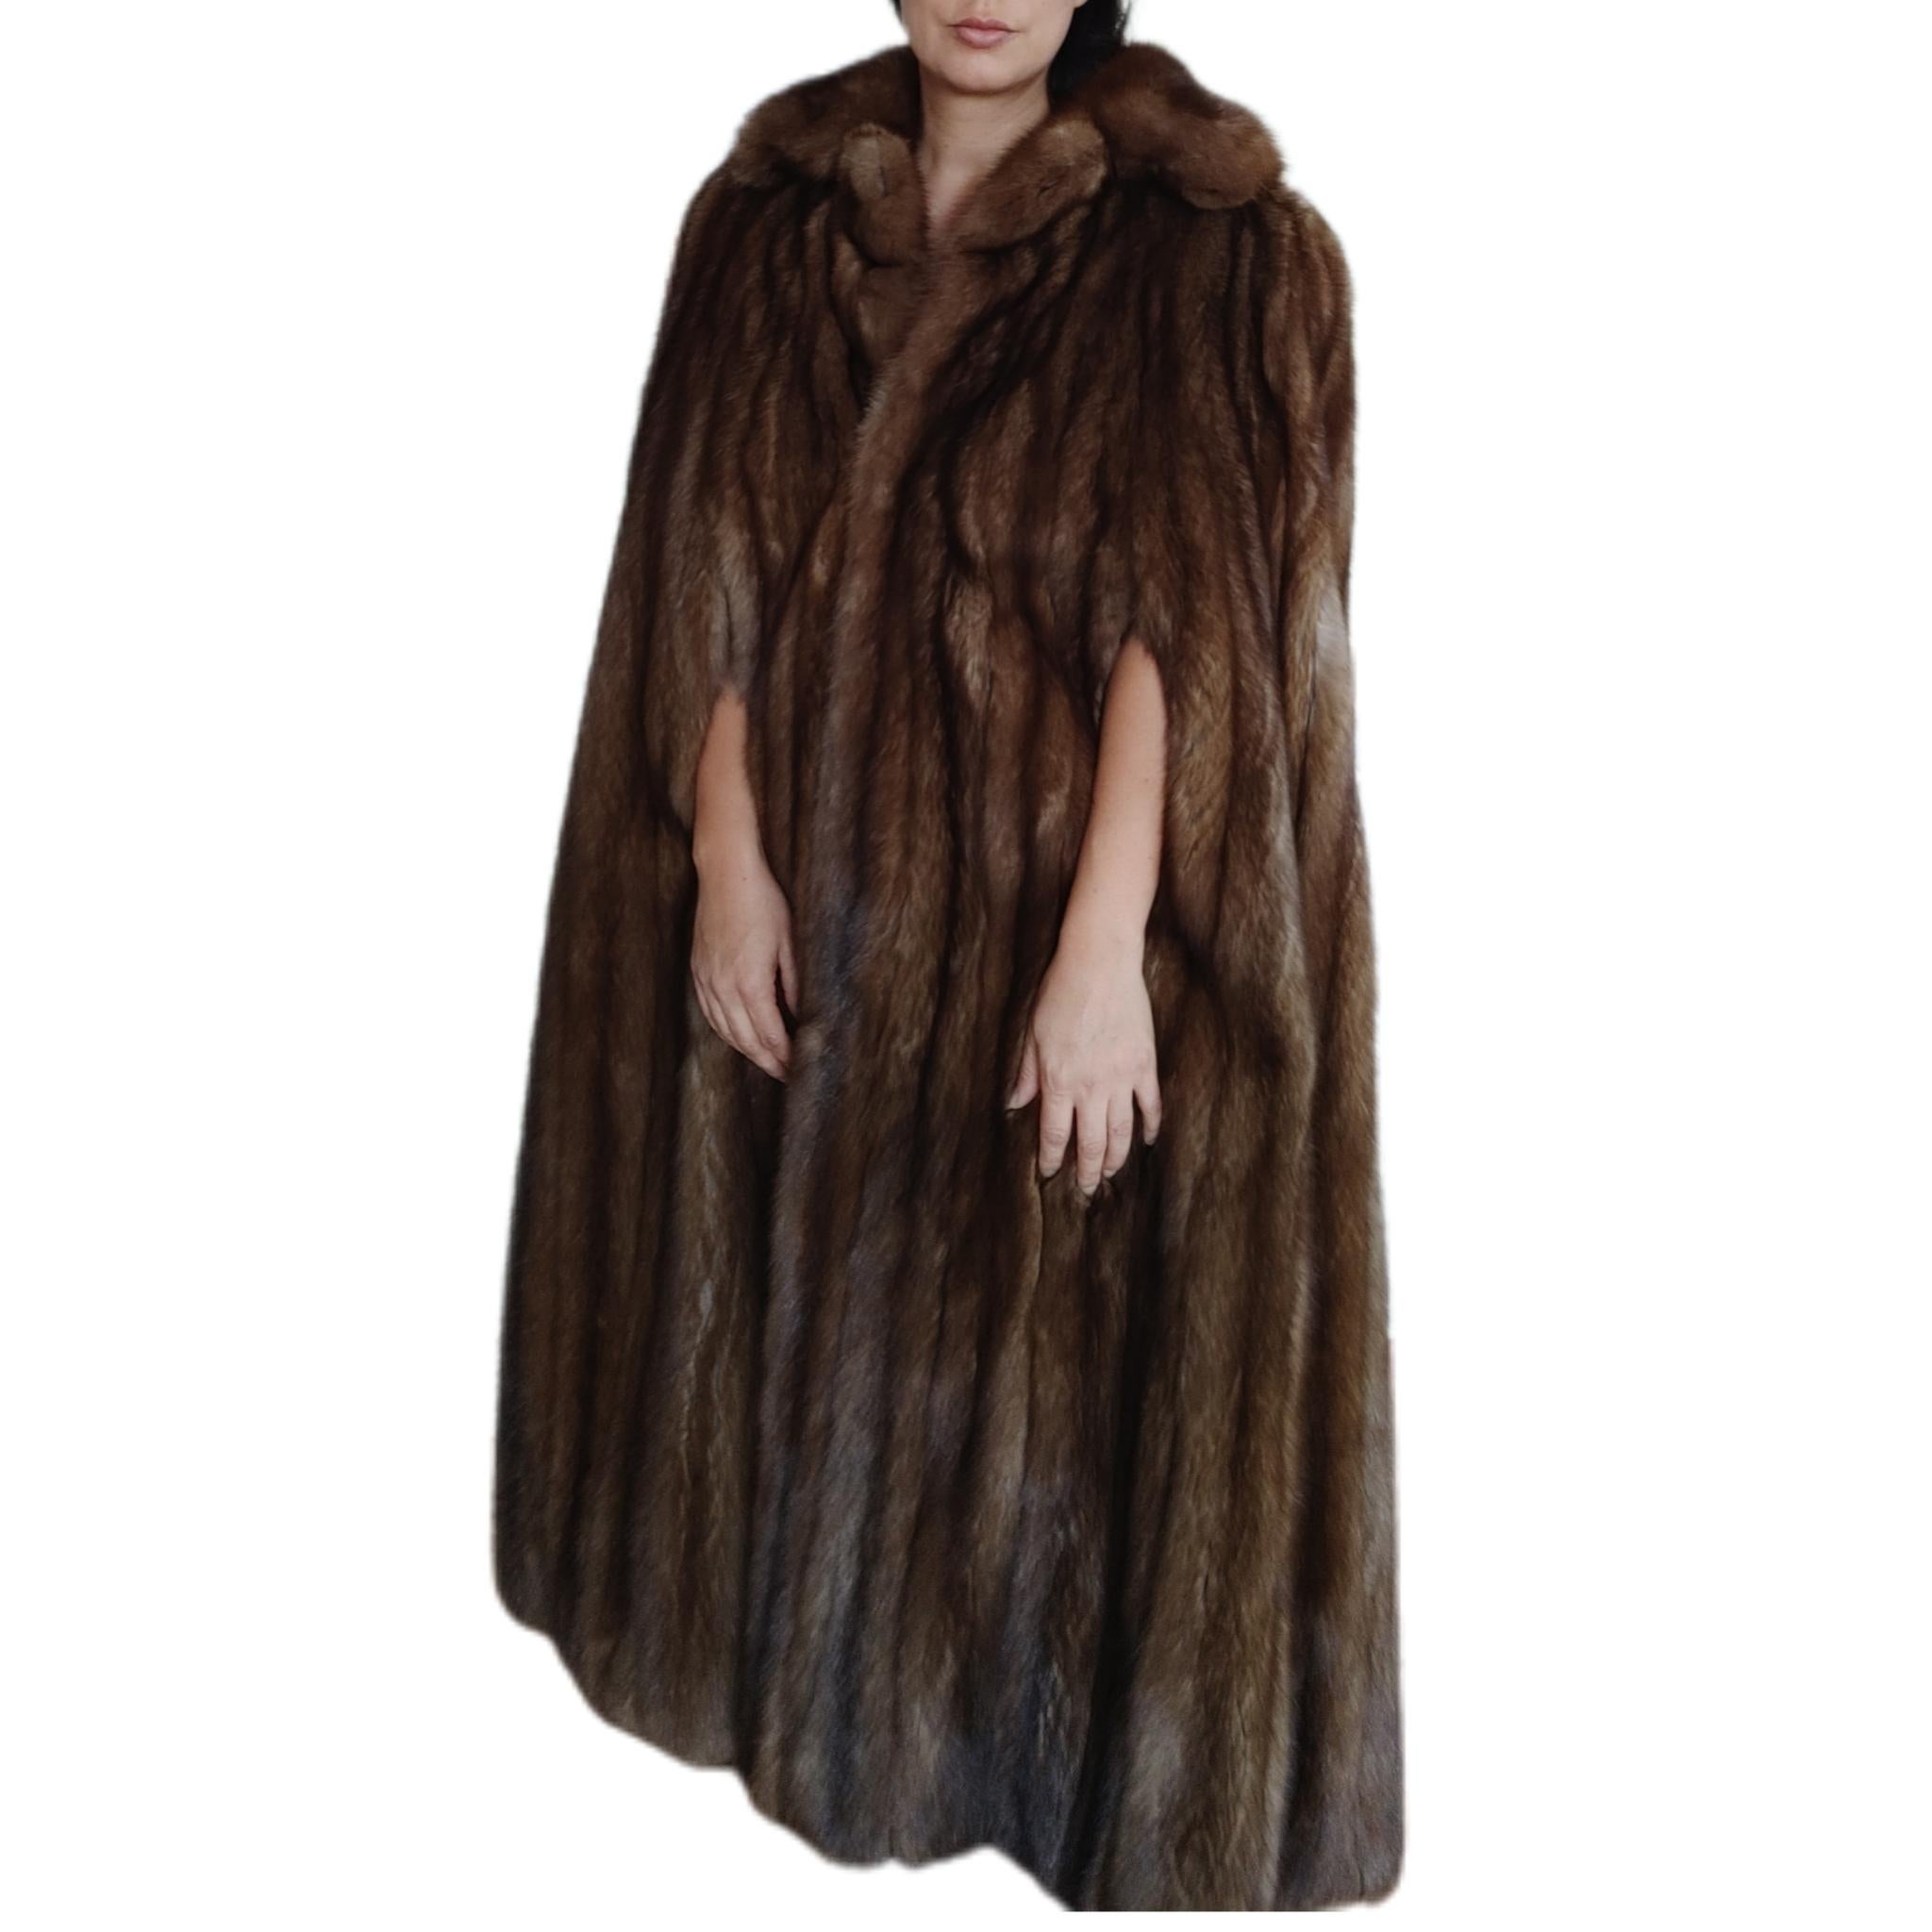  PRODUCT DESCRIPTION:

Brand new luxurious Yves Saint Laurent Fourrures Russian Sable cape with arm slits

Condition: Brand New

Closure: hook and eye 

Color: silver tip 

Material: Russian Sable 

Garment type: Cape

Sleeves: Straight

Pockets: